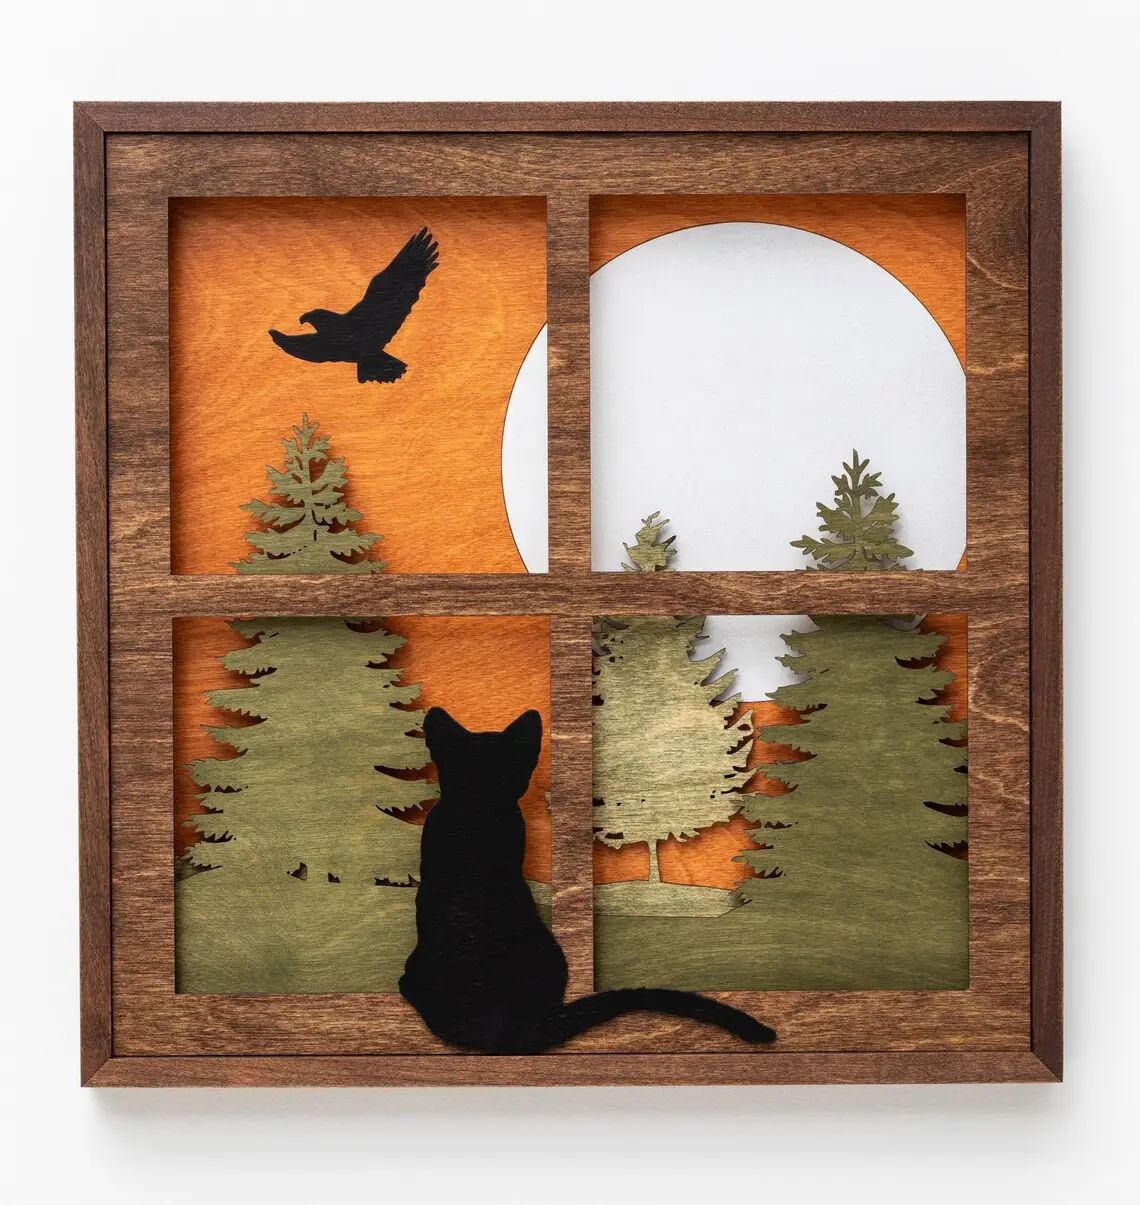 New style Black Cat in Window 3D Wood Shadow Box Handcrafted Scene